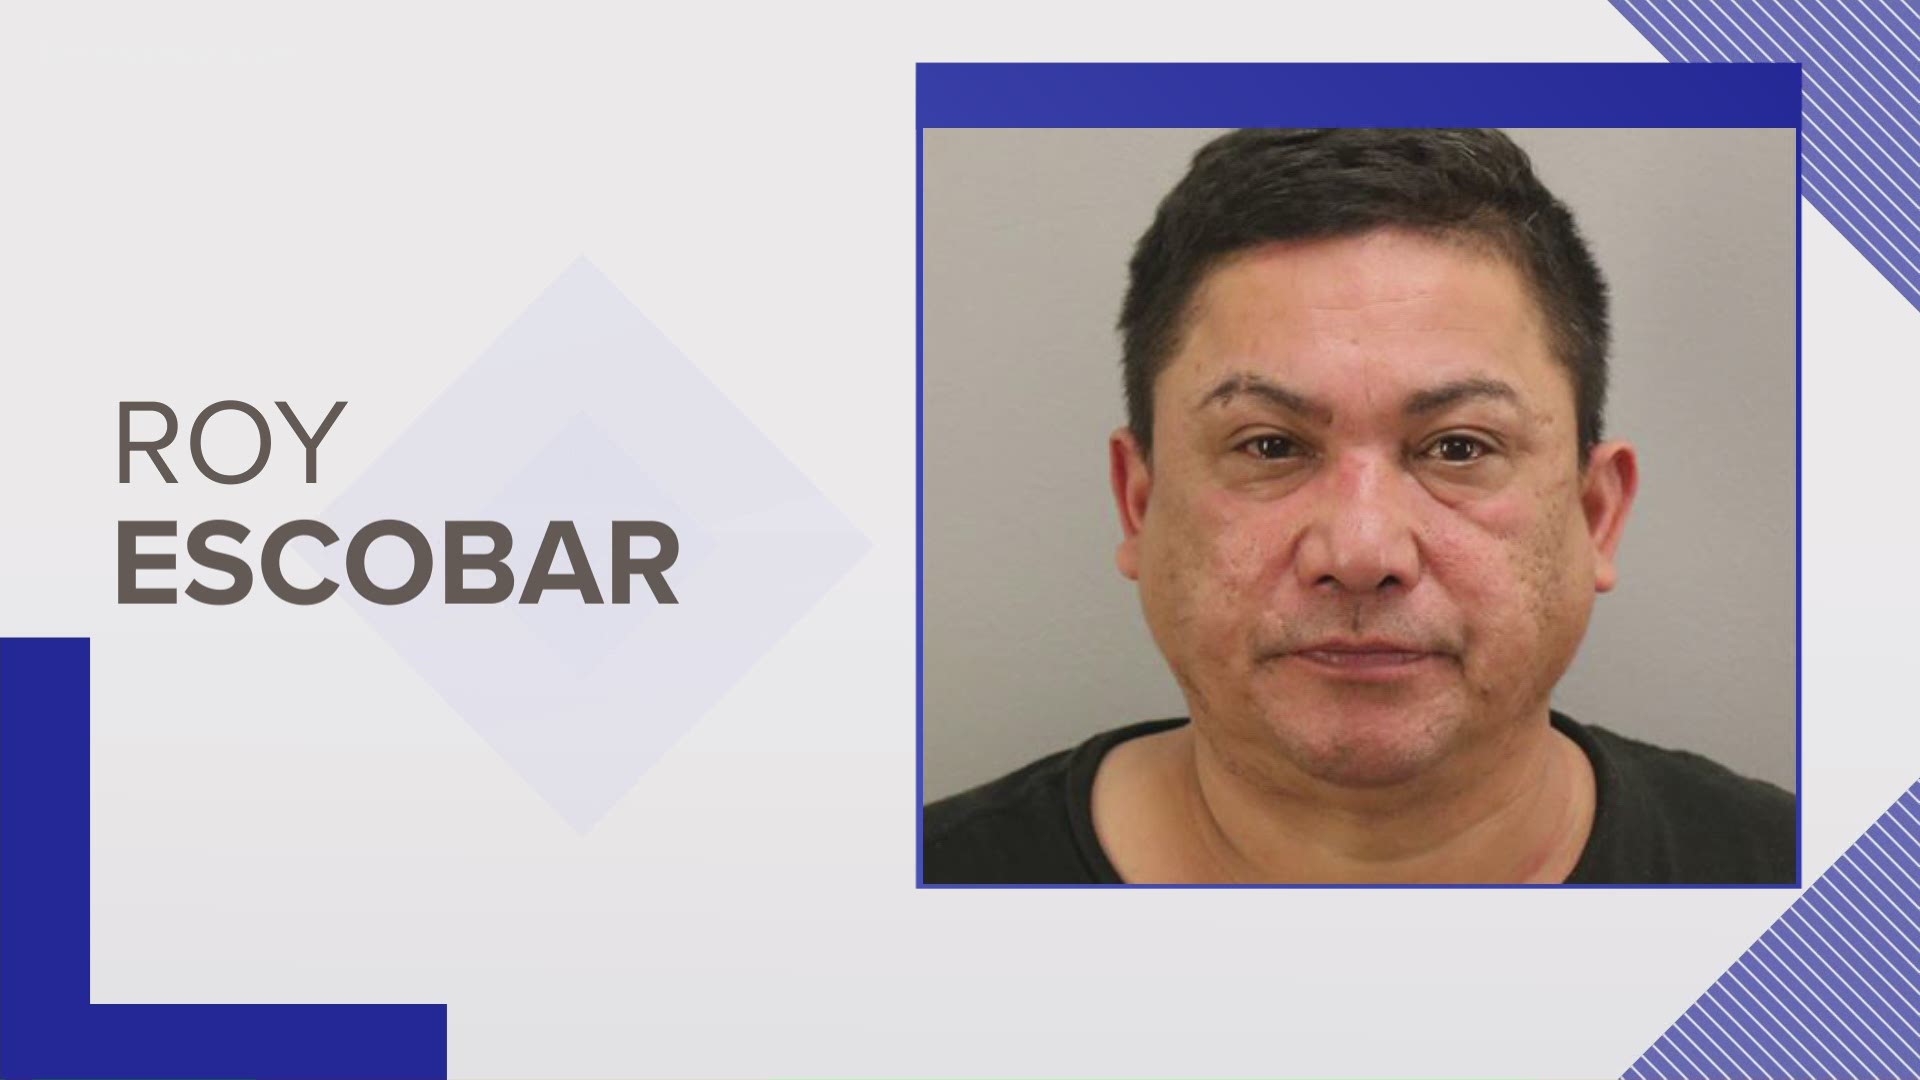 According to police, Roy Escobar was drunk when he ran off Atlantic Avenue and into a hotel sign that was on the side of the road. He then struck the victim.